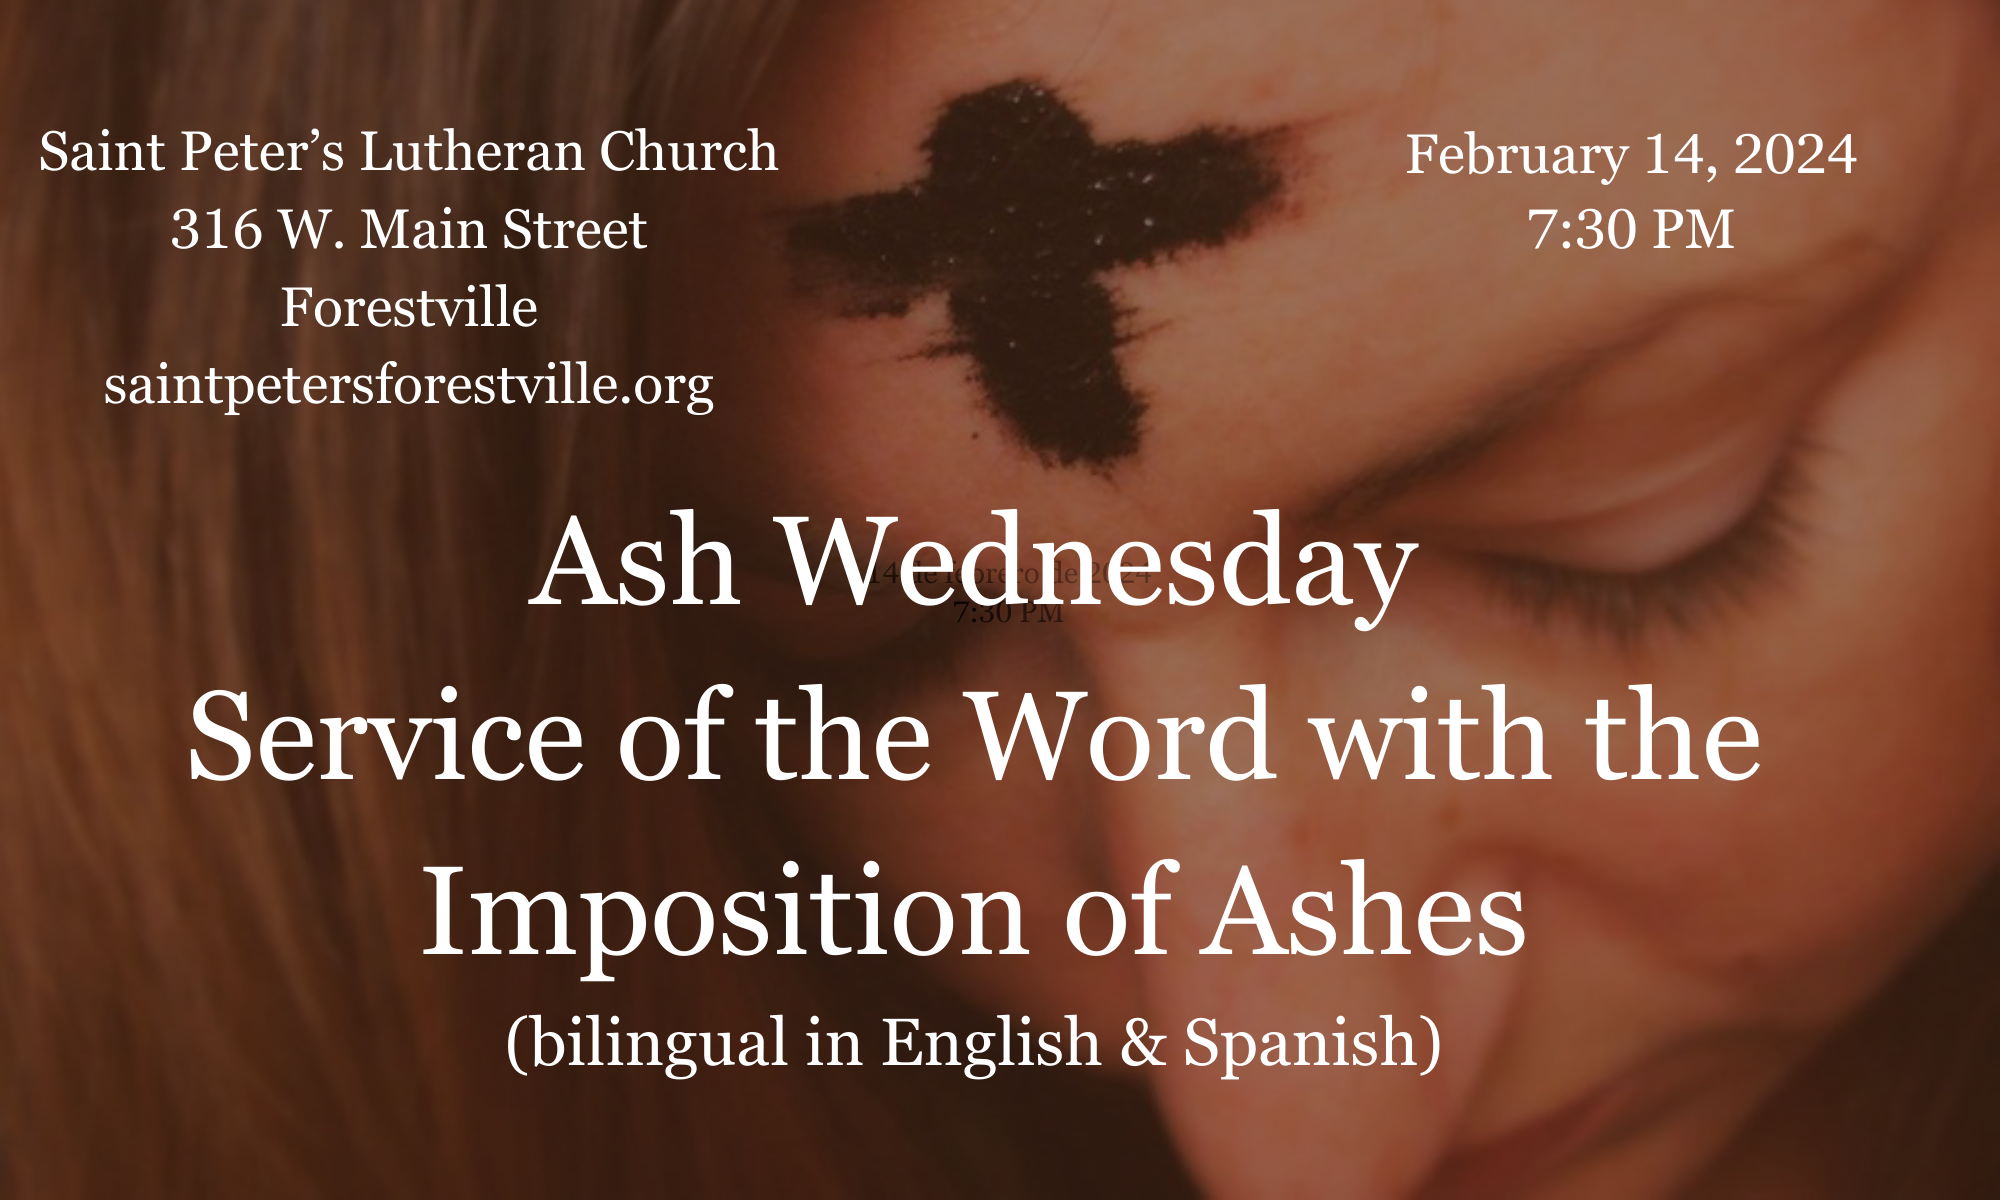 Ash Wednesday Service with the Imposition of Ashes